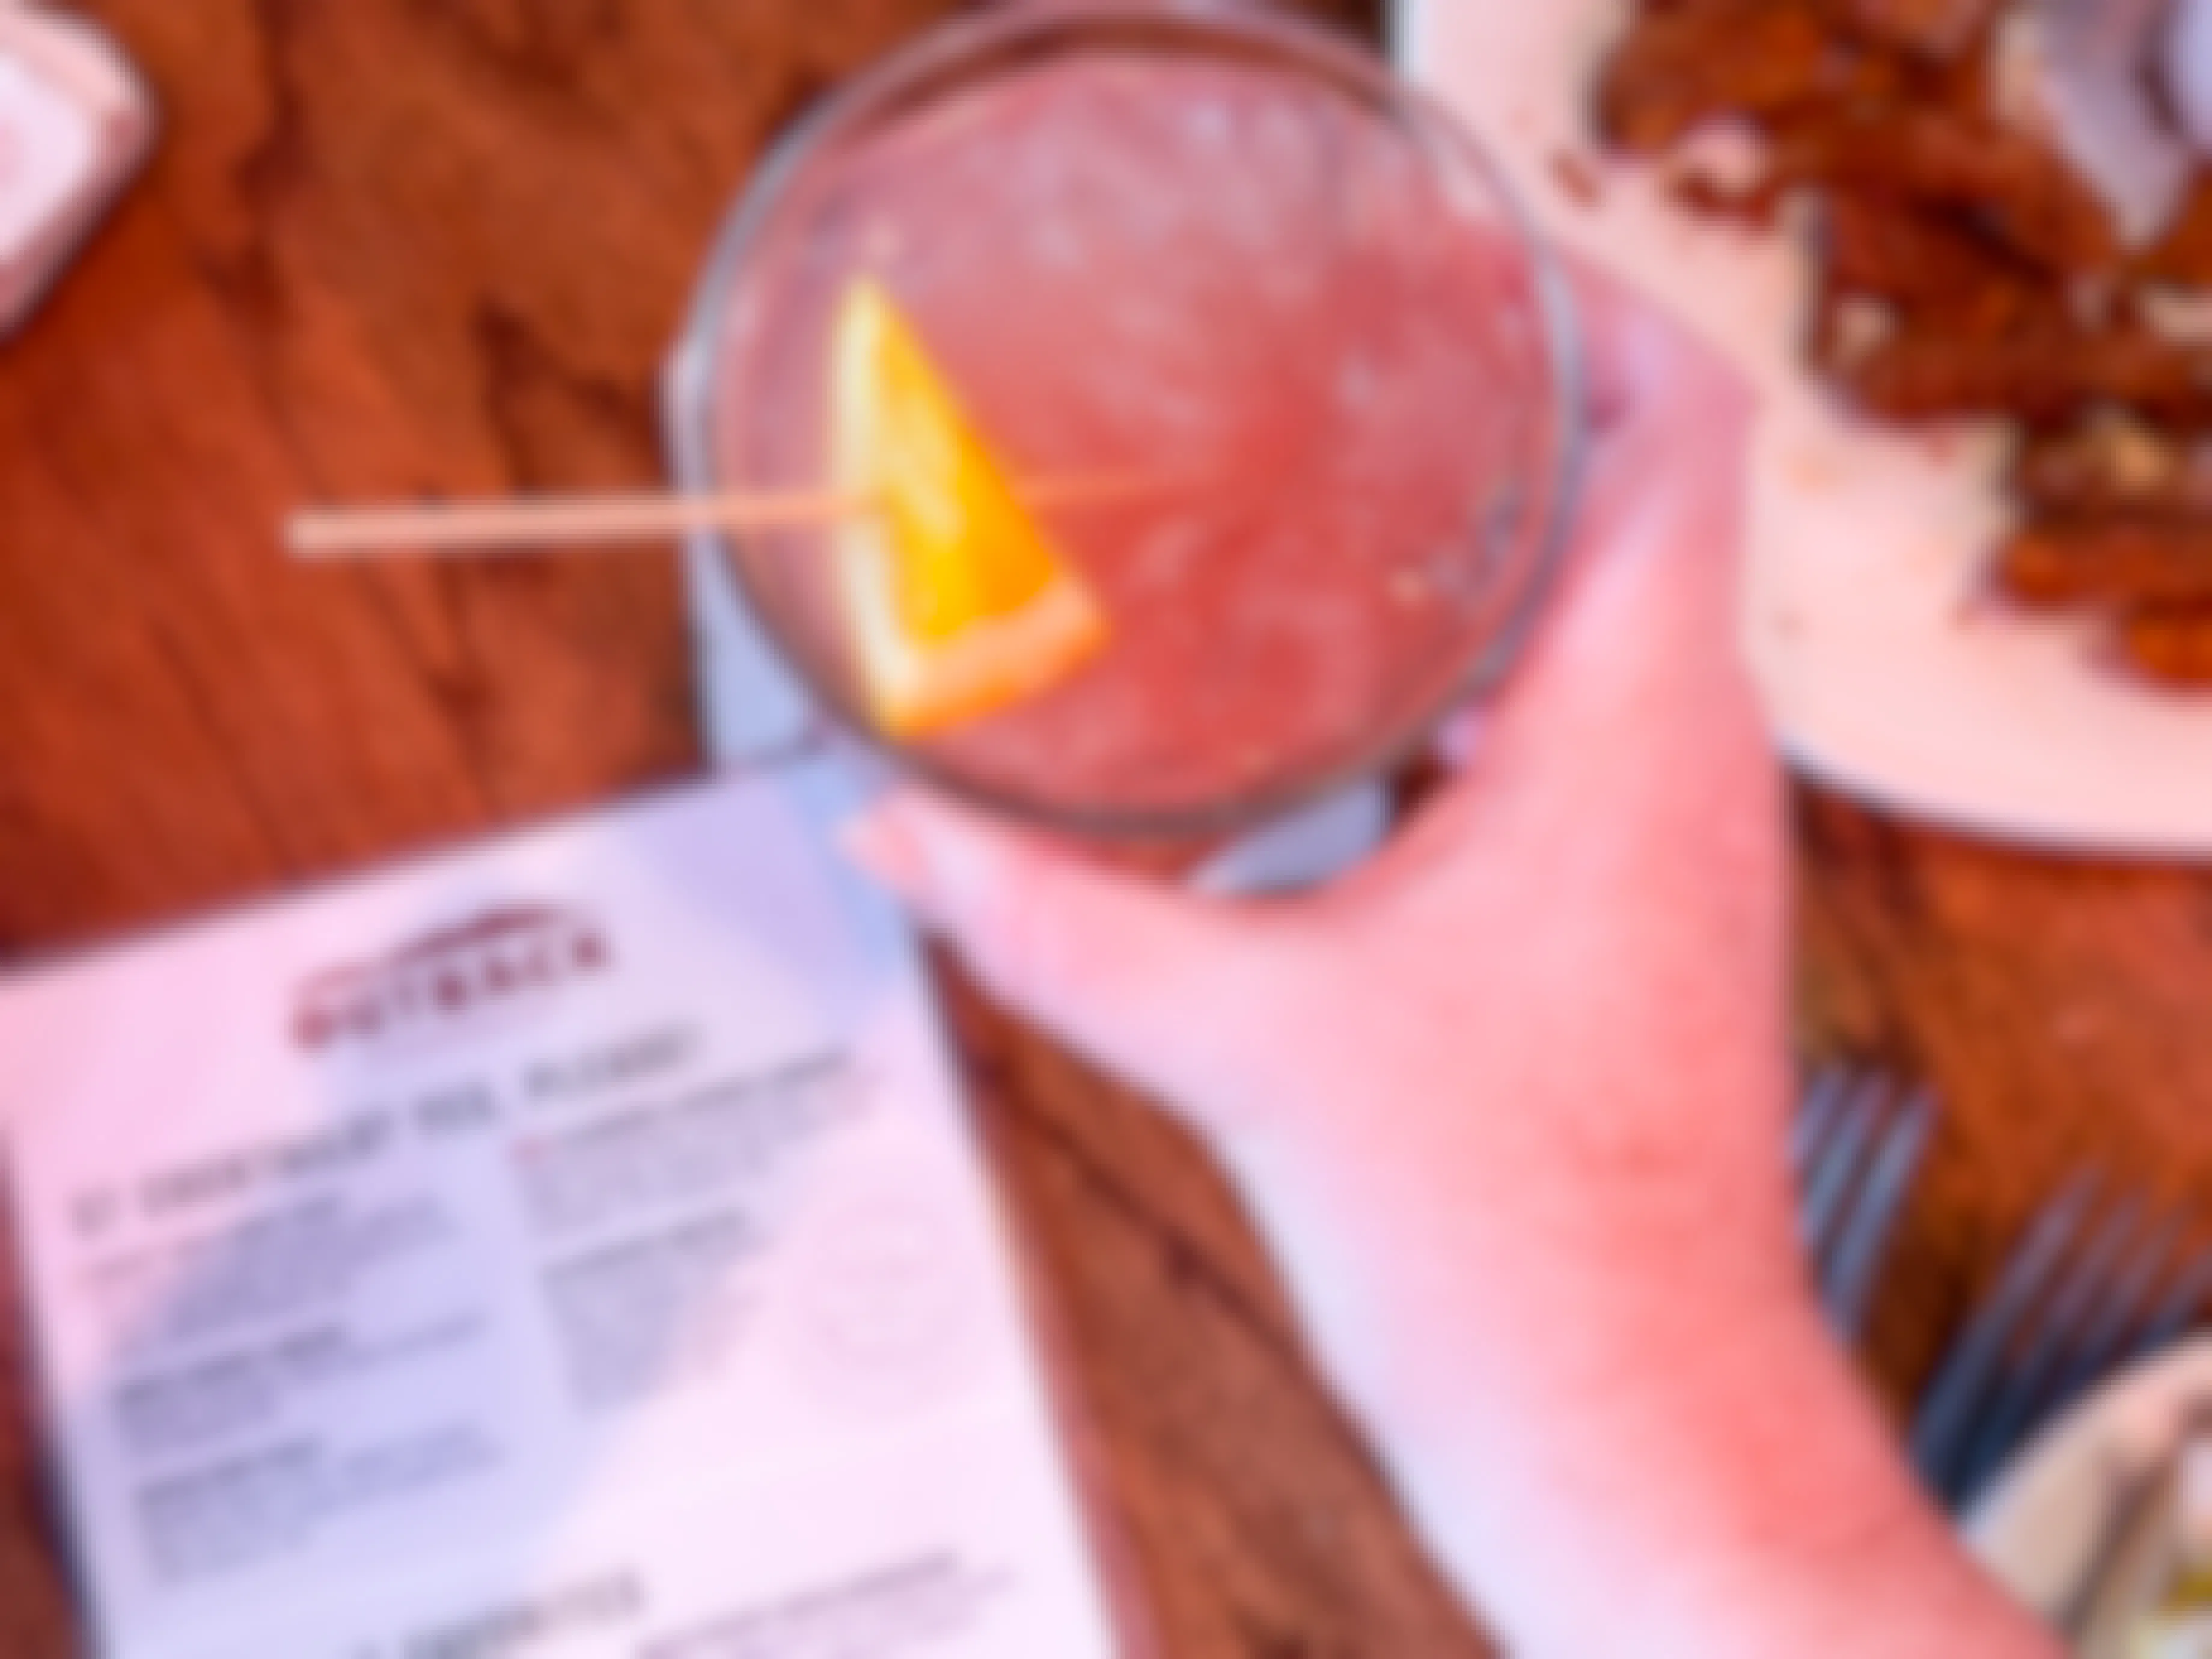 A person's hand grabbing a cocktail drink sitting on a table next to an Outback Steakhouse drink menu.